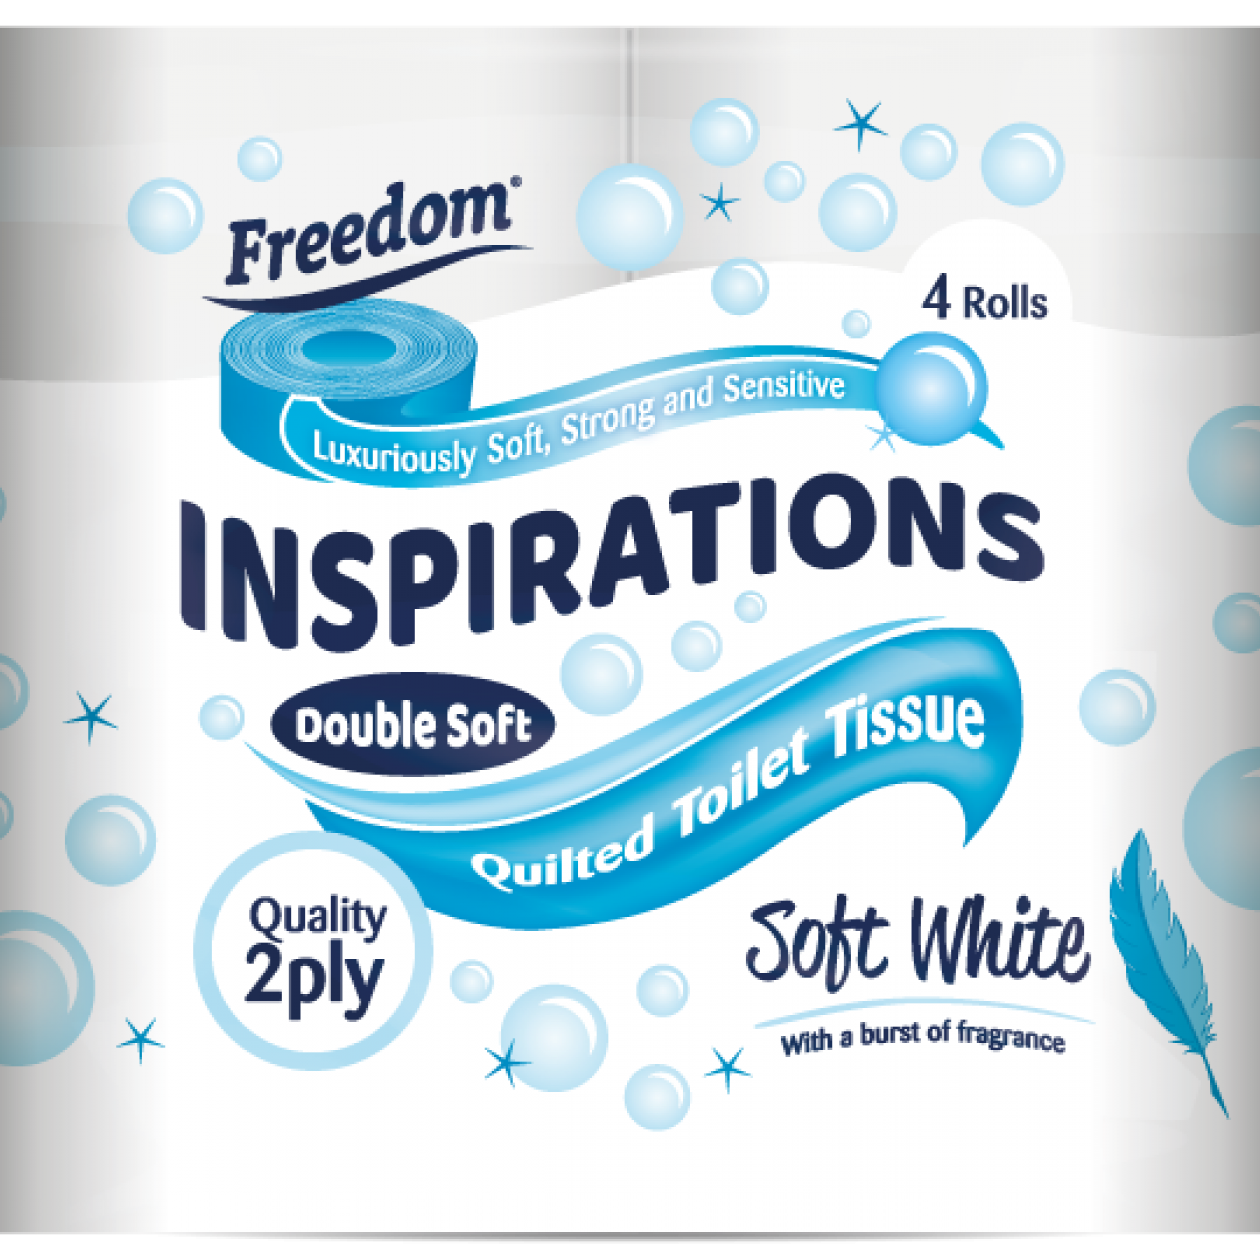 Freedom Inspirations Toilet tissue 4 rolls 2 Ply